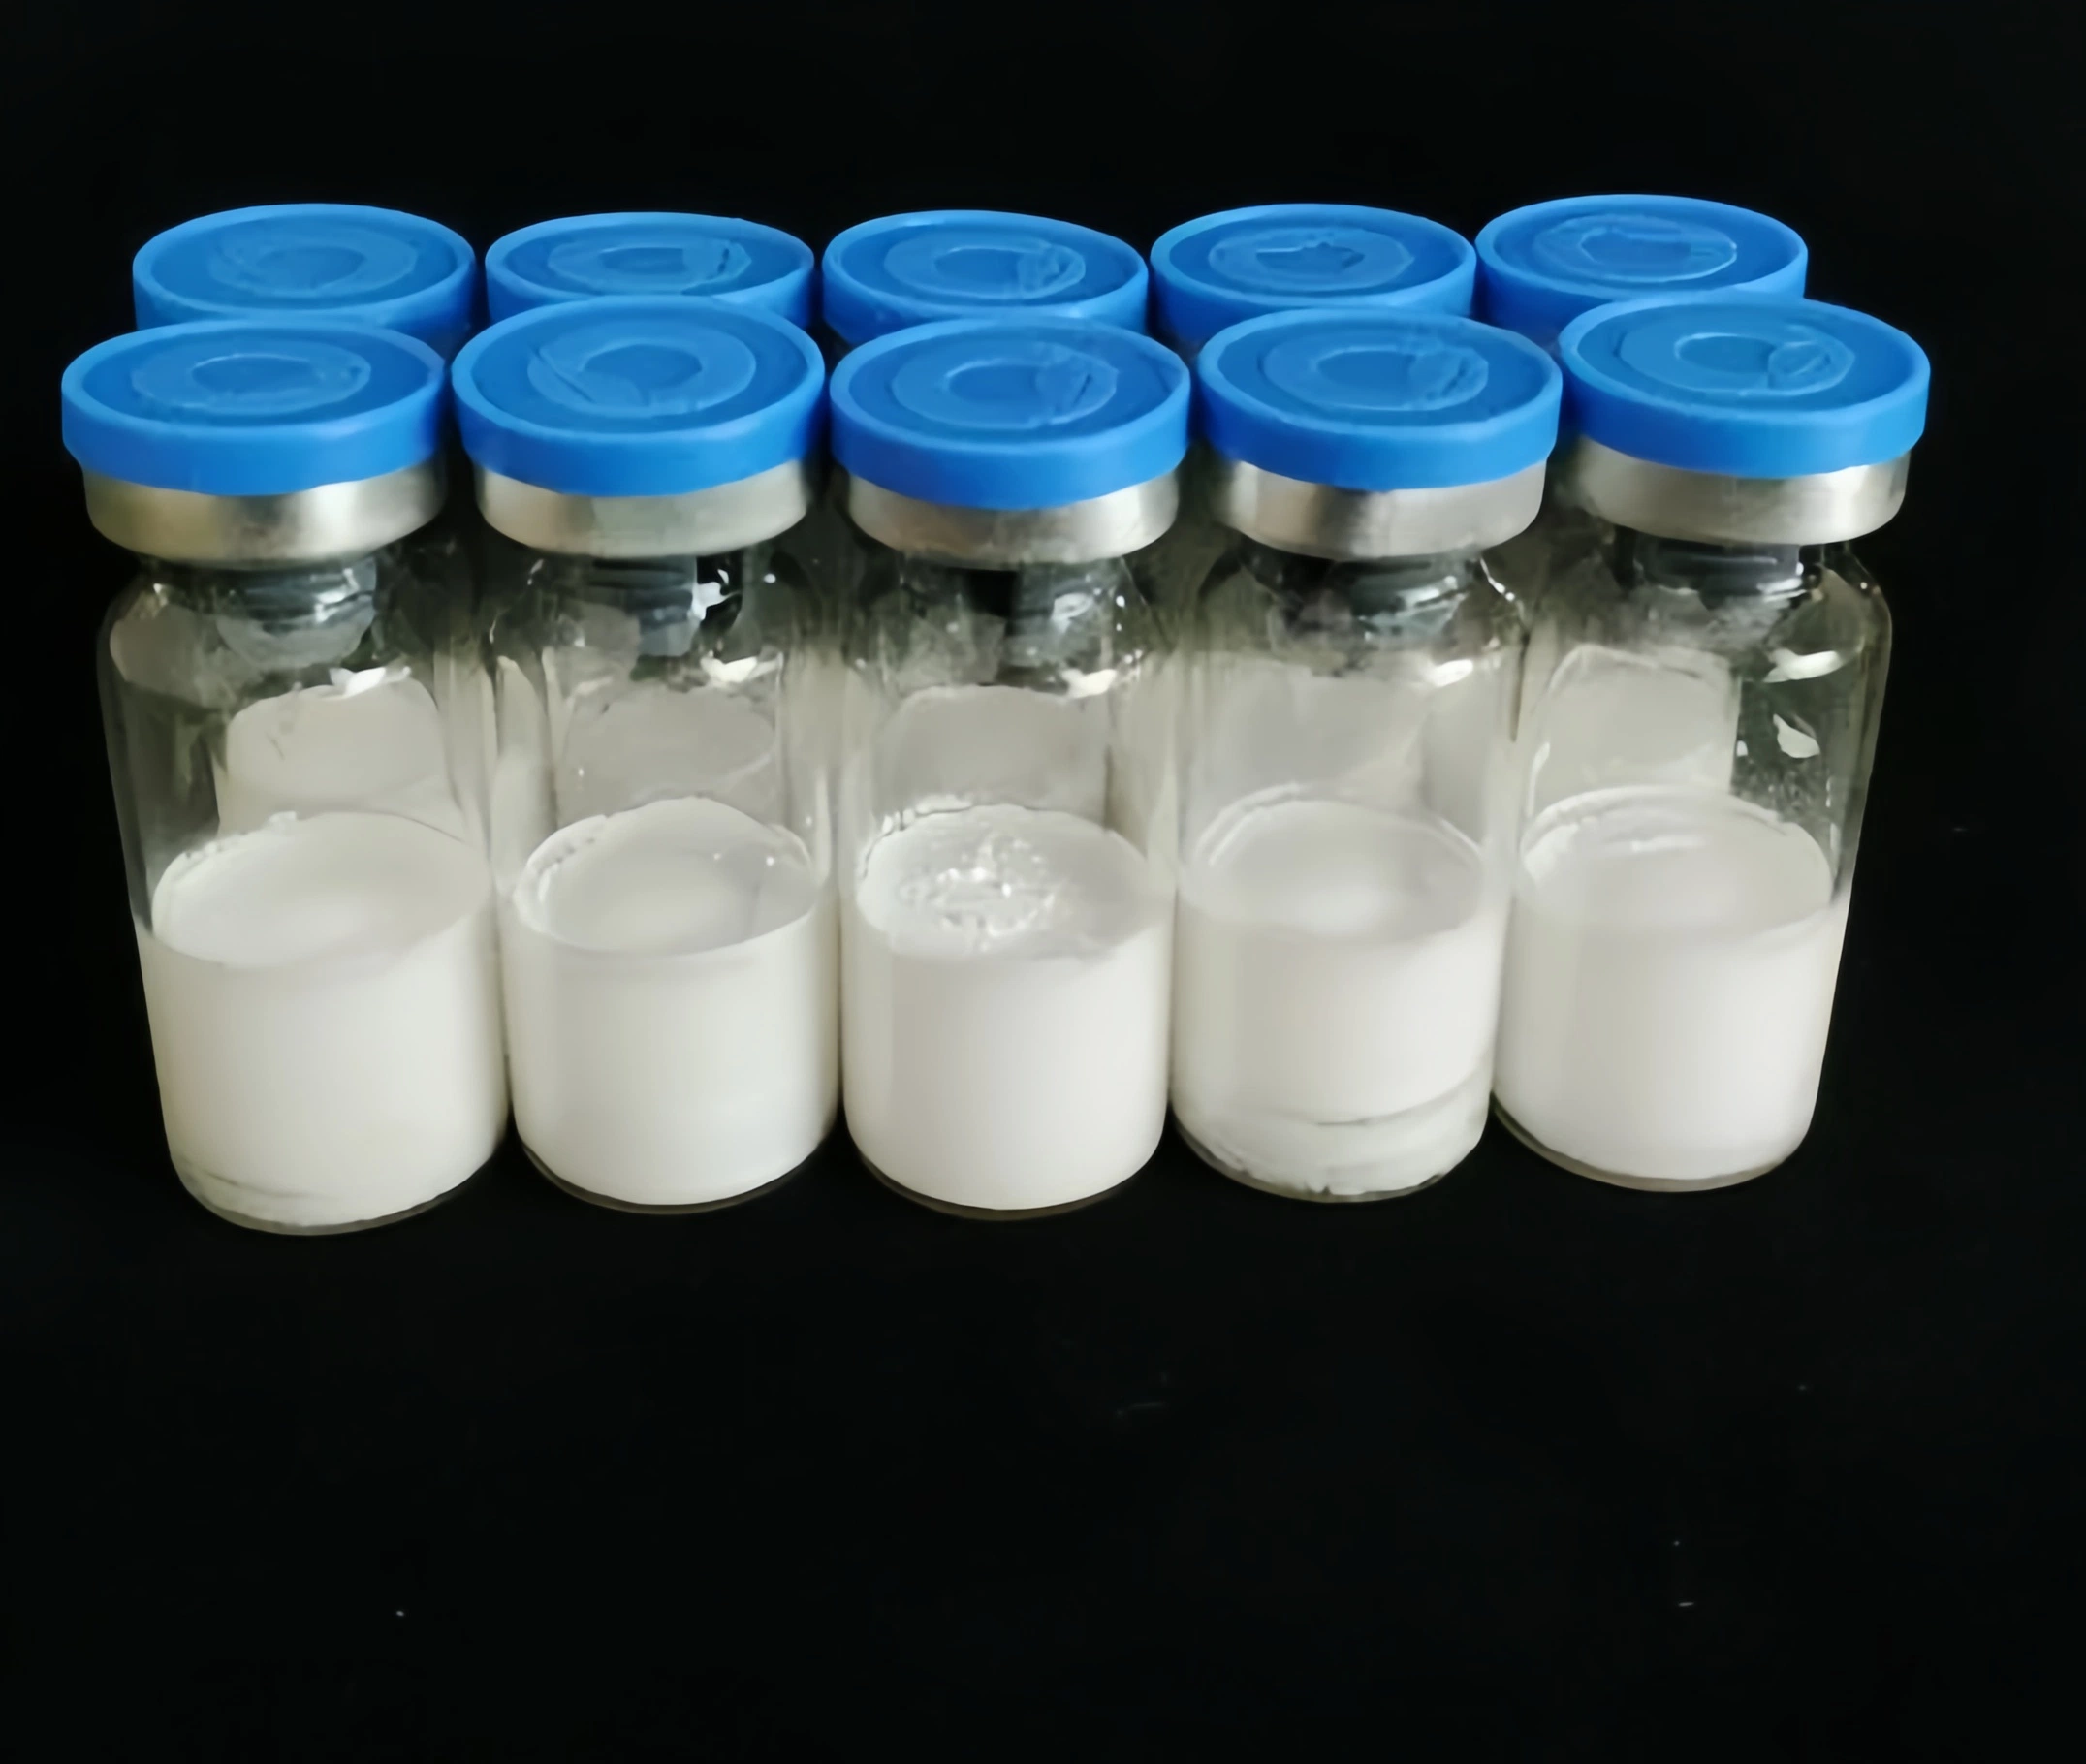 Synthesis Peptides 99% Purity Pnc-27/P21/P021/Mots-C/Ara 290/Ll-37/Adipotide/Ftpp/B7-33